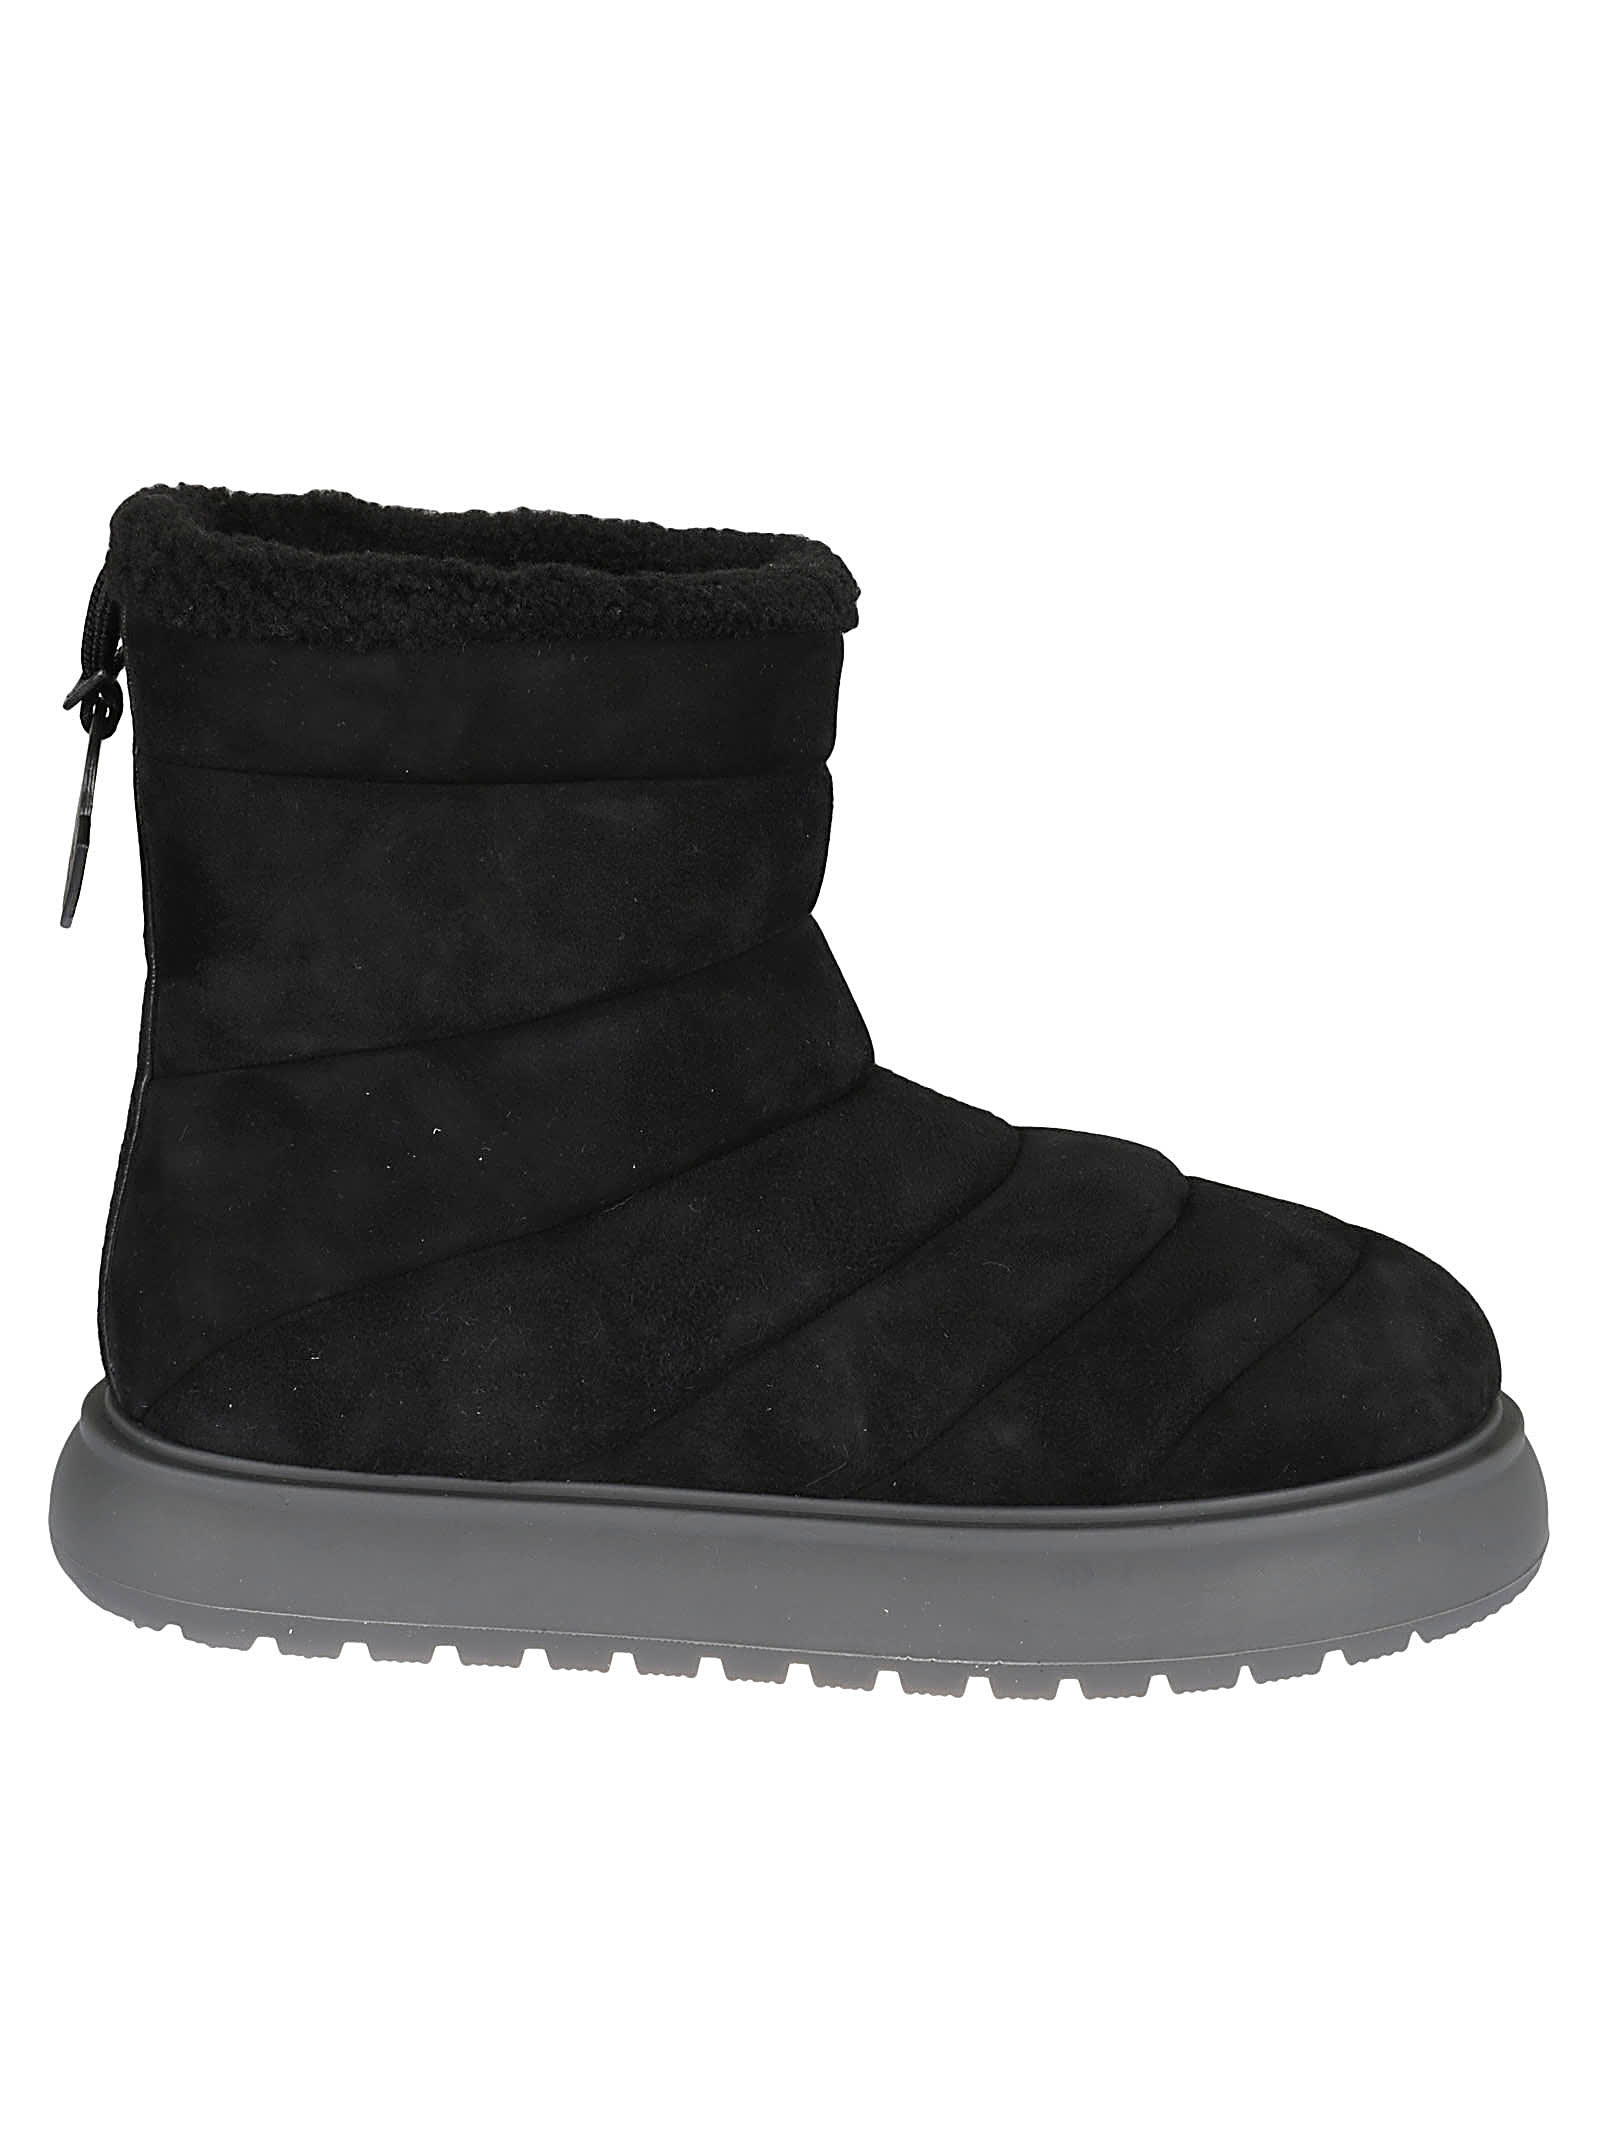 Moncler Hermosa Boots